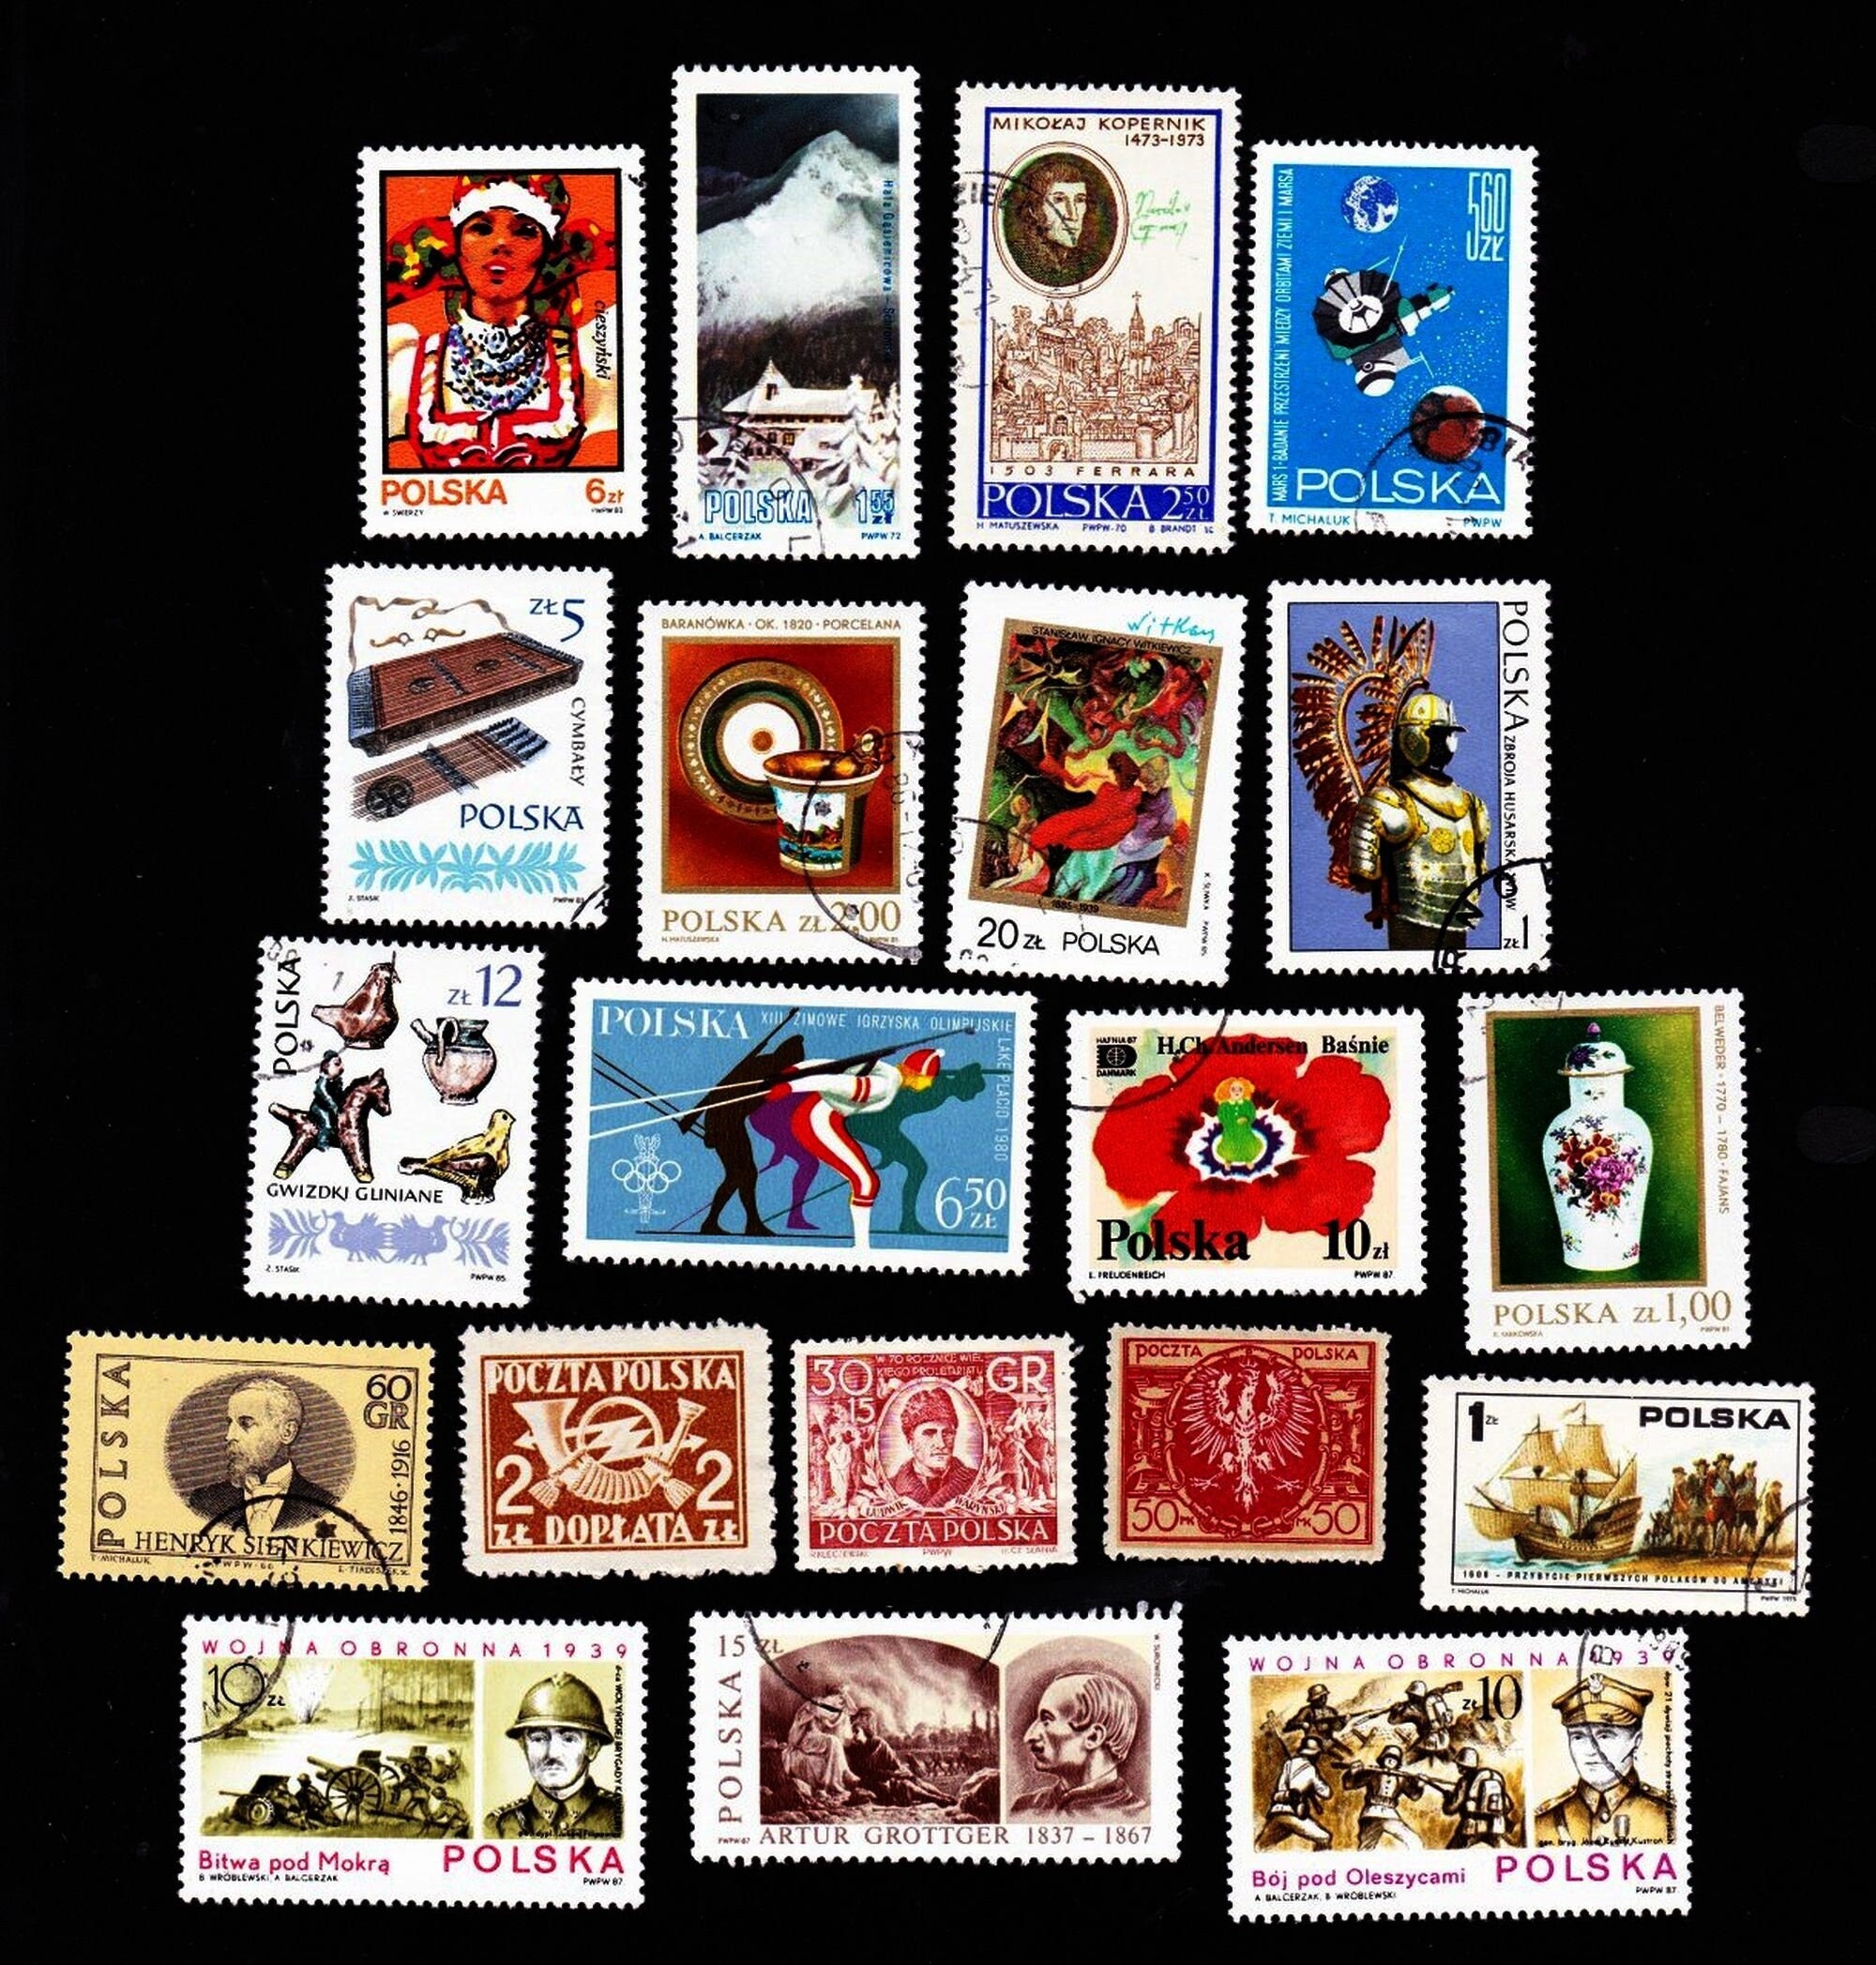 Unused Vintage 20 Cent Postage Stamps Collection of 20 Cents US